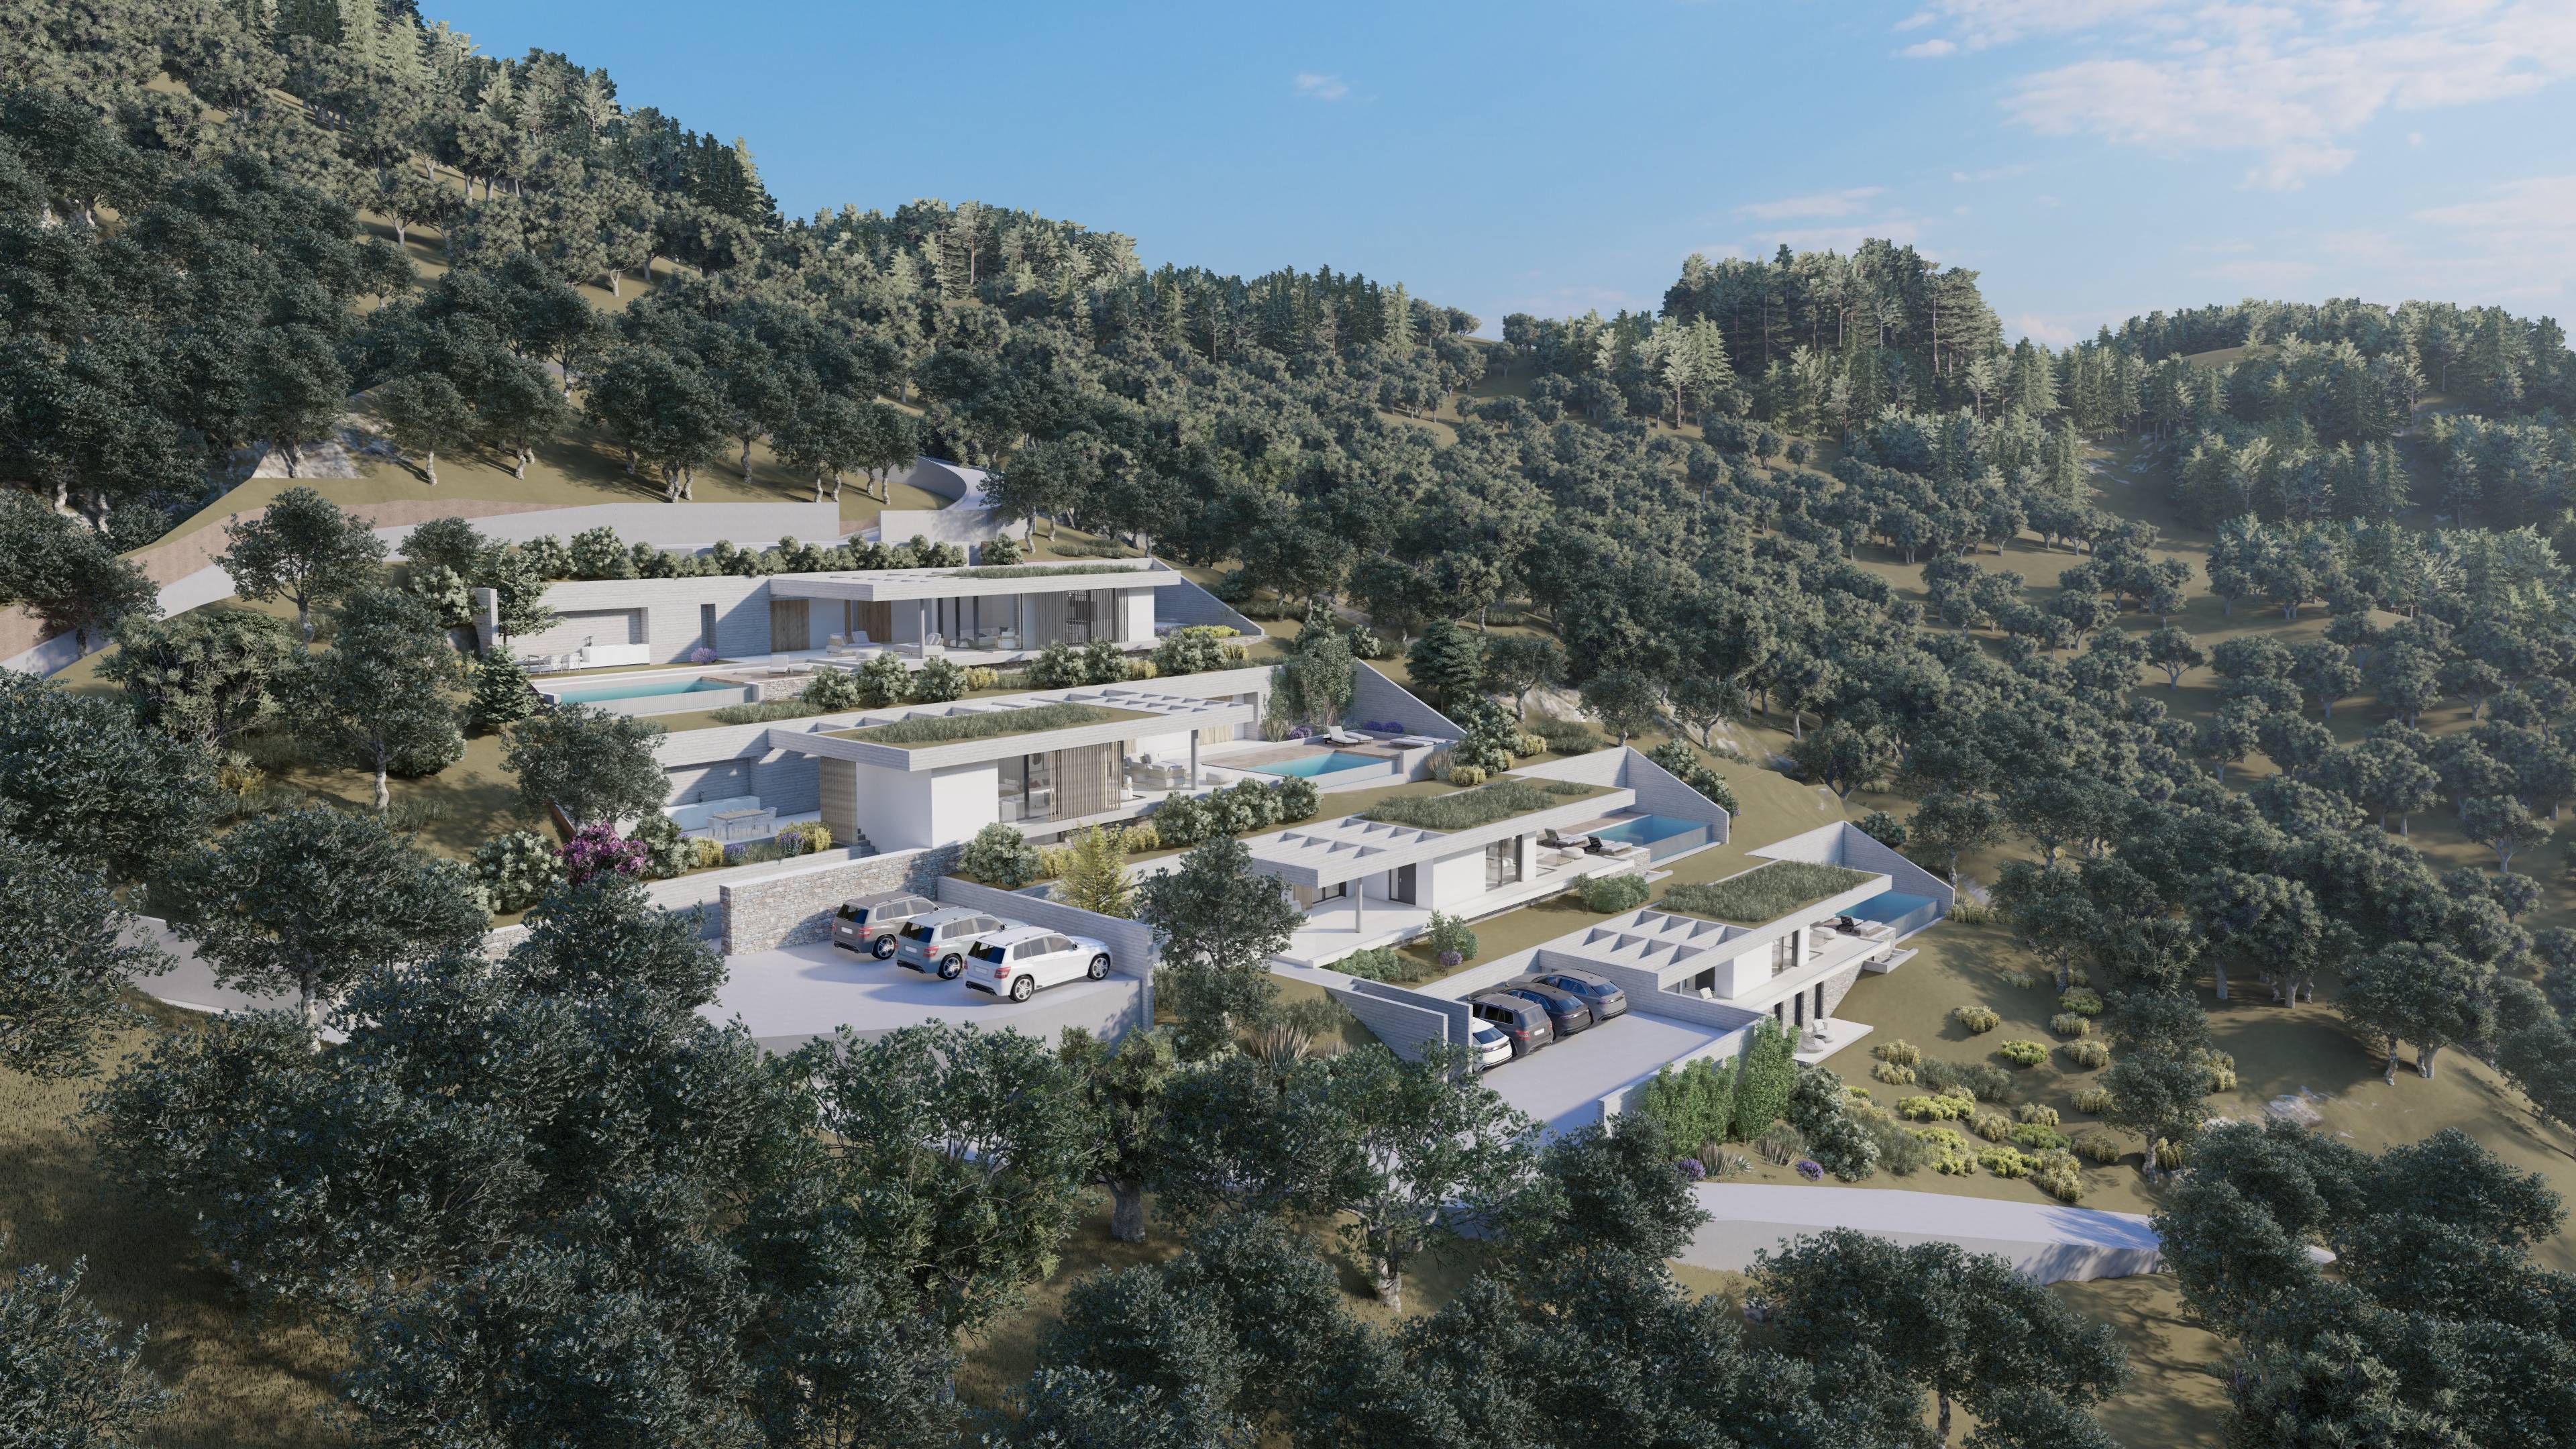 LUXURY MAGIC FOREST RETREAT VILLA VI AMID SKIATHOS’ PRESERVED OLIVE GROVES - PRIME INVESTMENT OPPORTUNITY